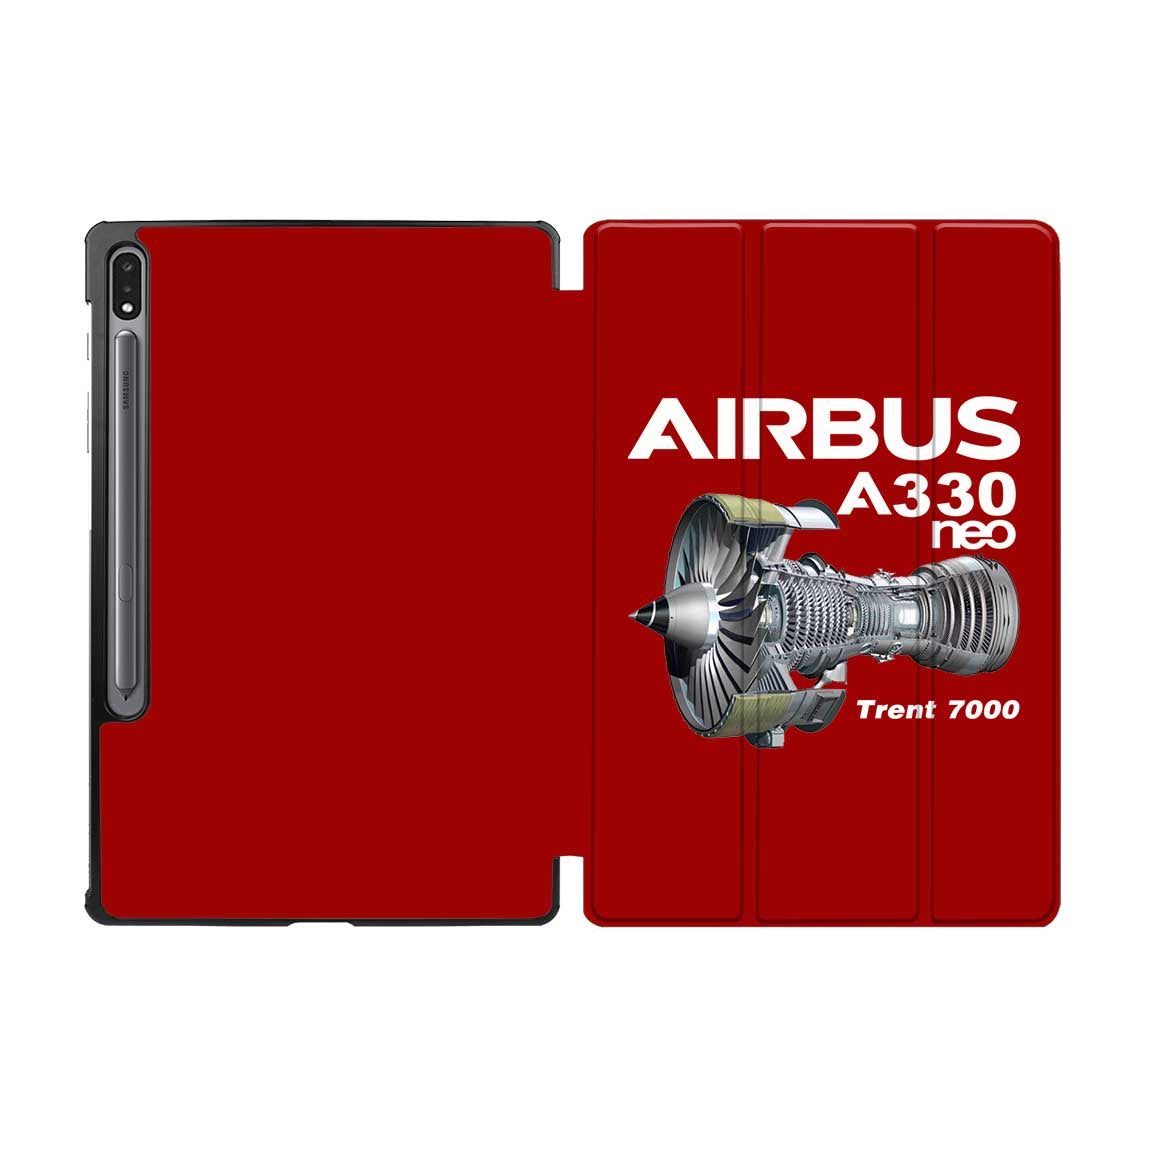 Airbus A330neo & Trent 7000 Designed Samsung Tablet Cases